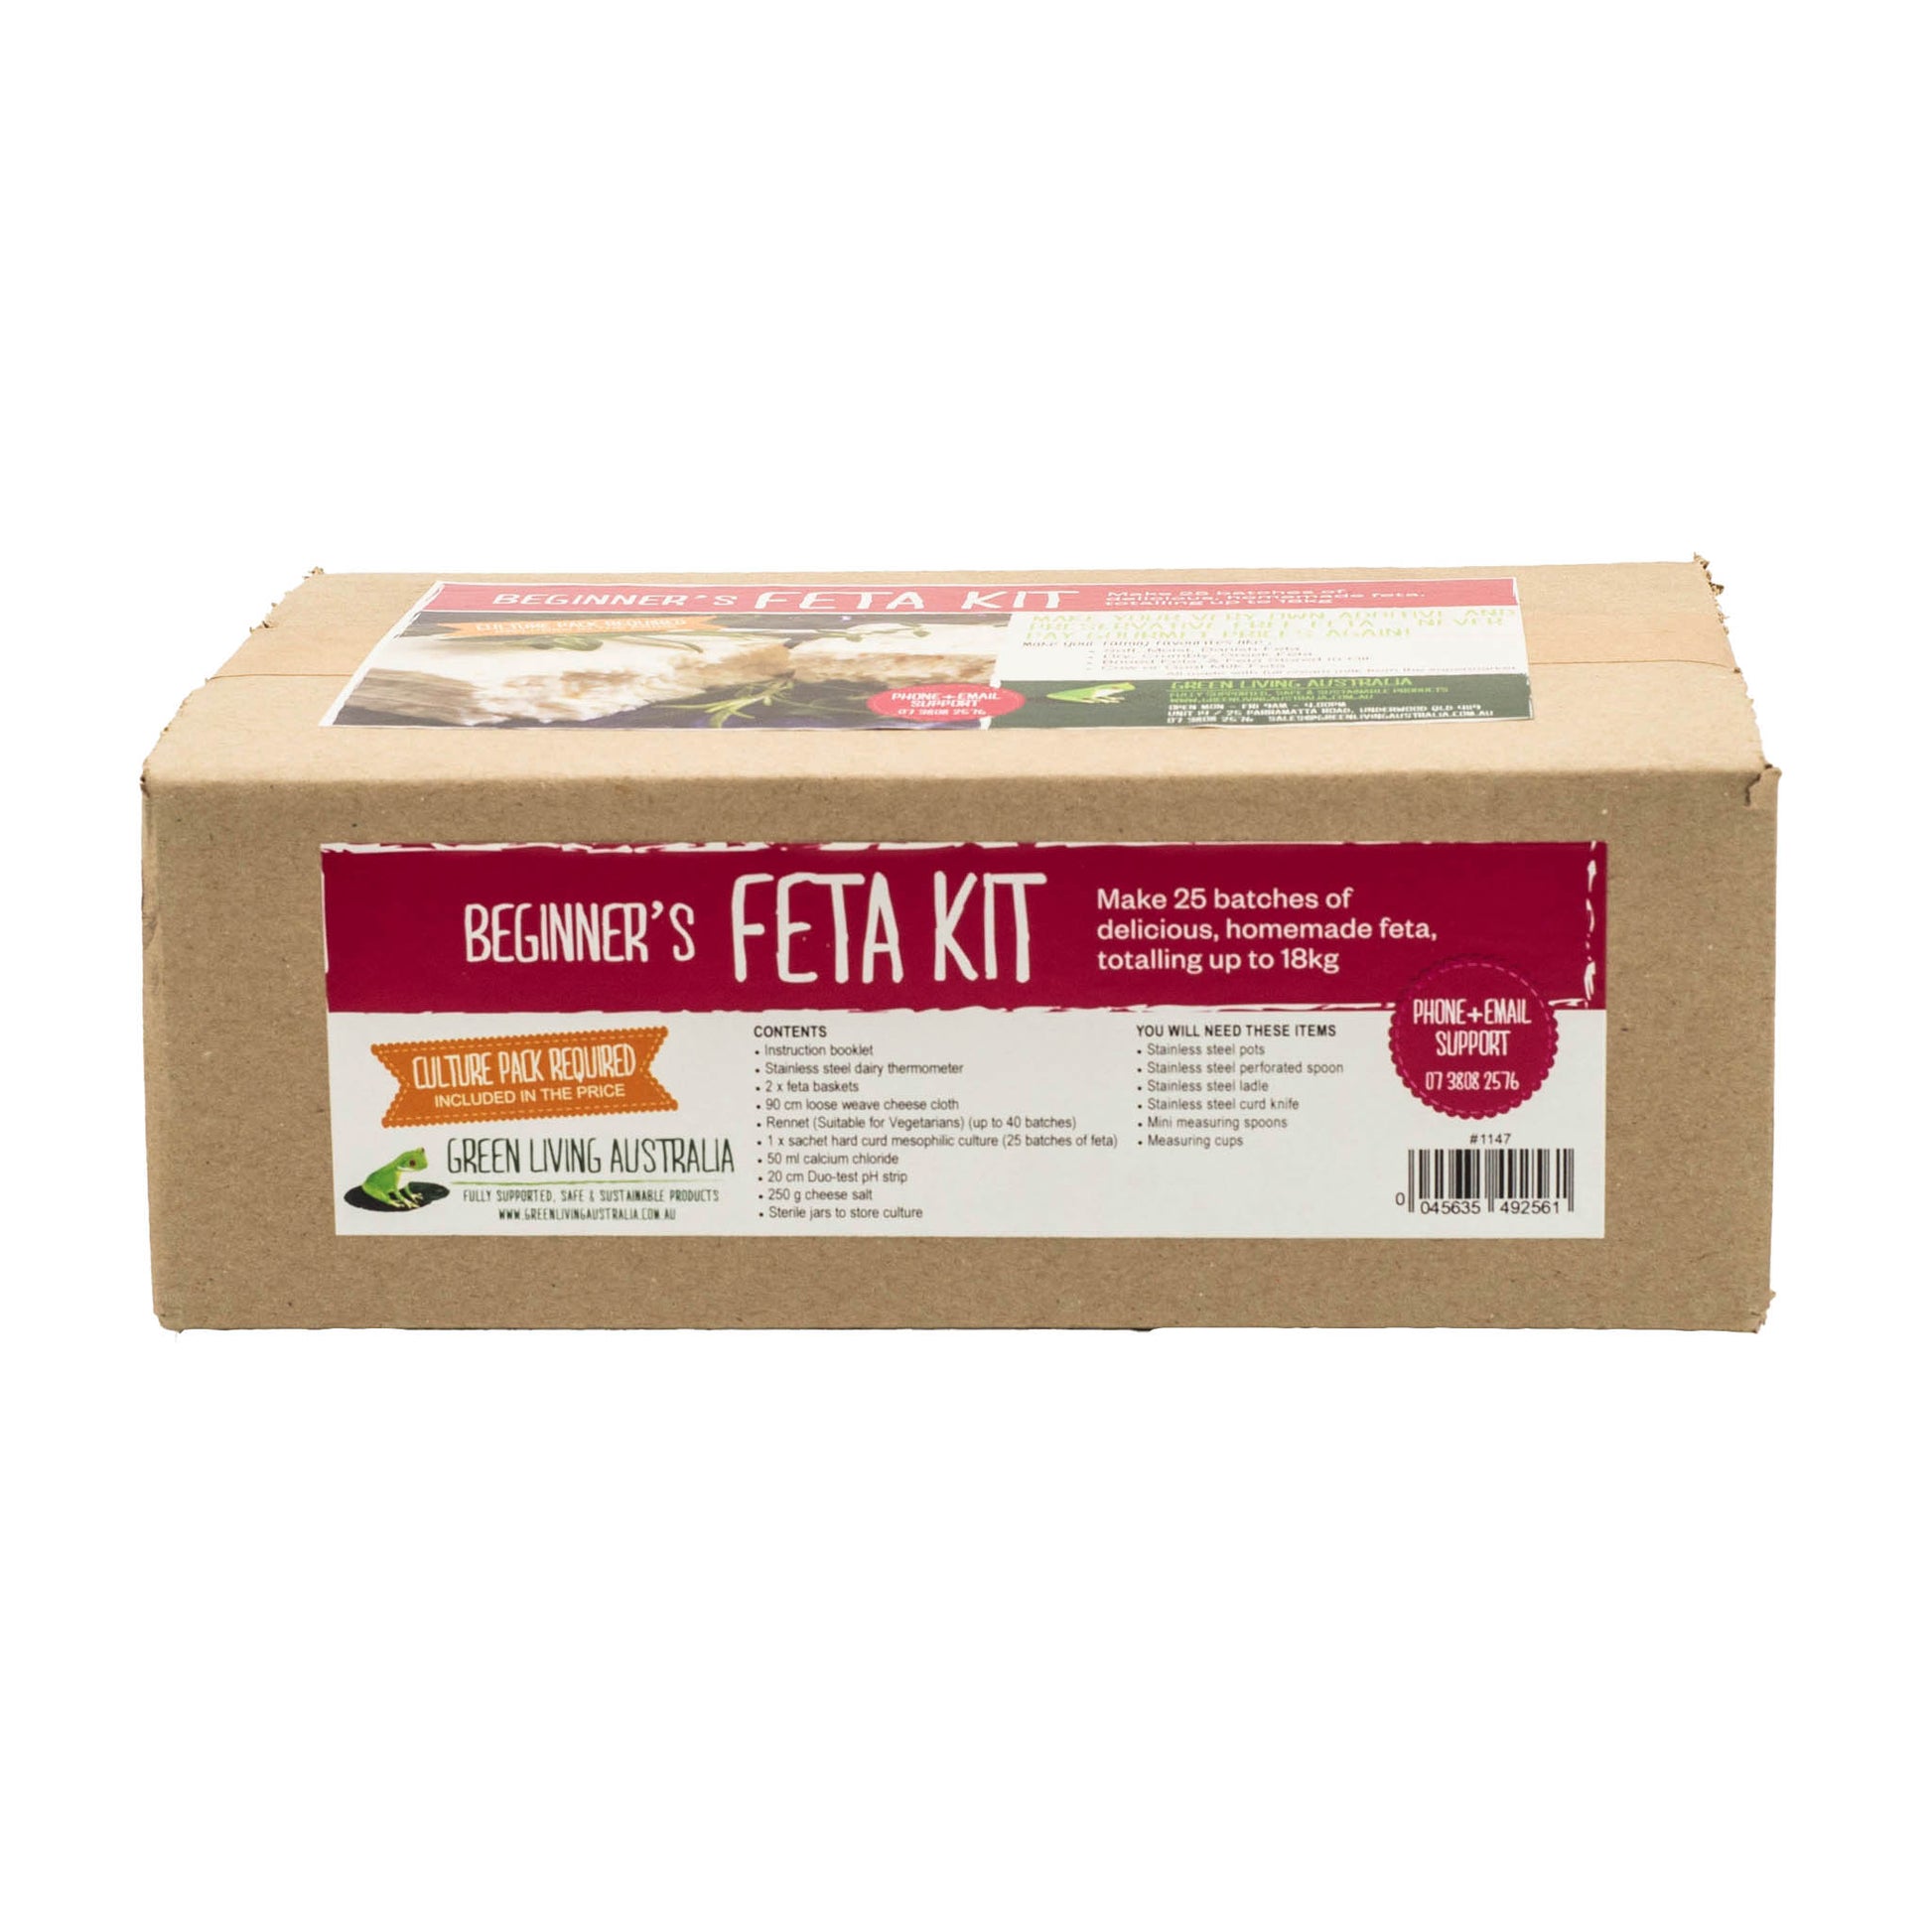 Feta cheese making kit contents and instructions.